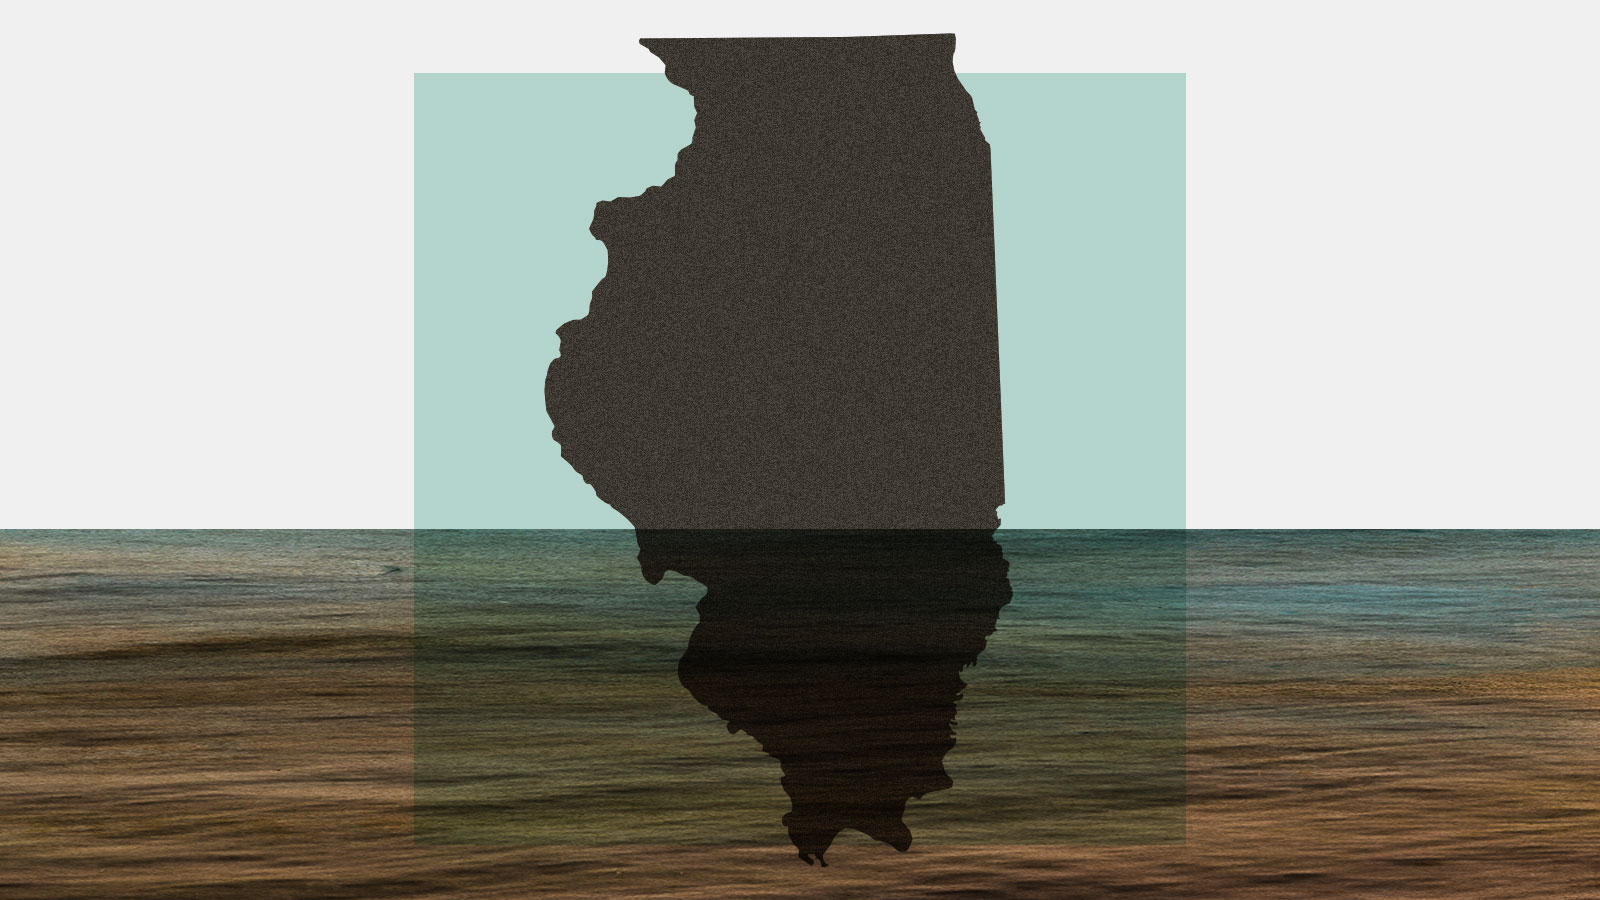 Silhouette of Illinois state with floodwater covering it halfway